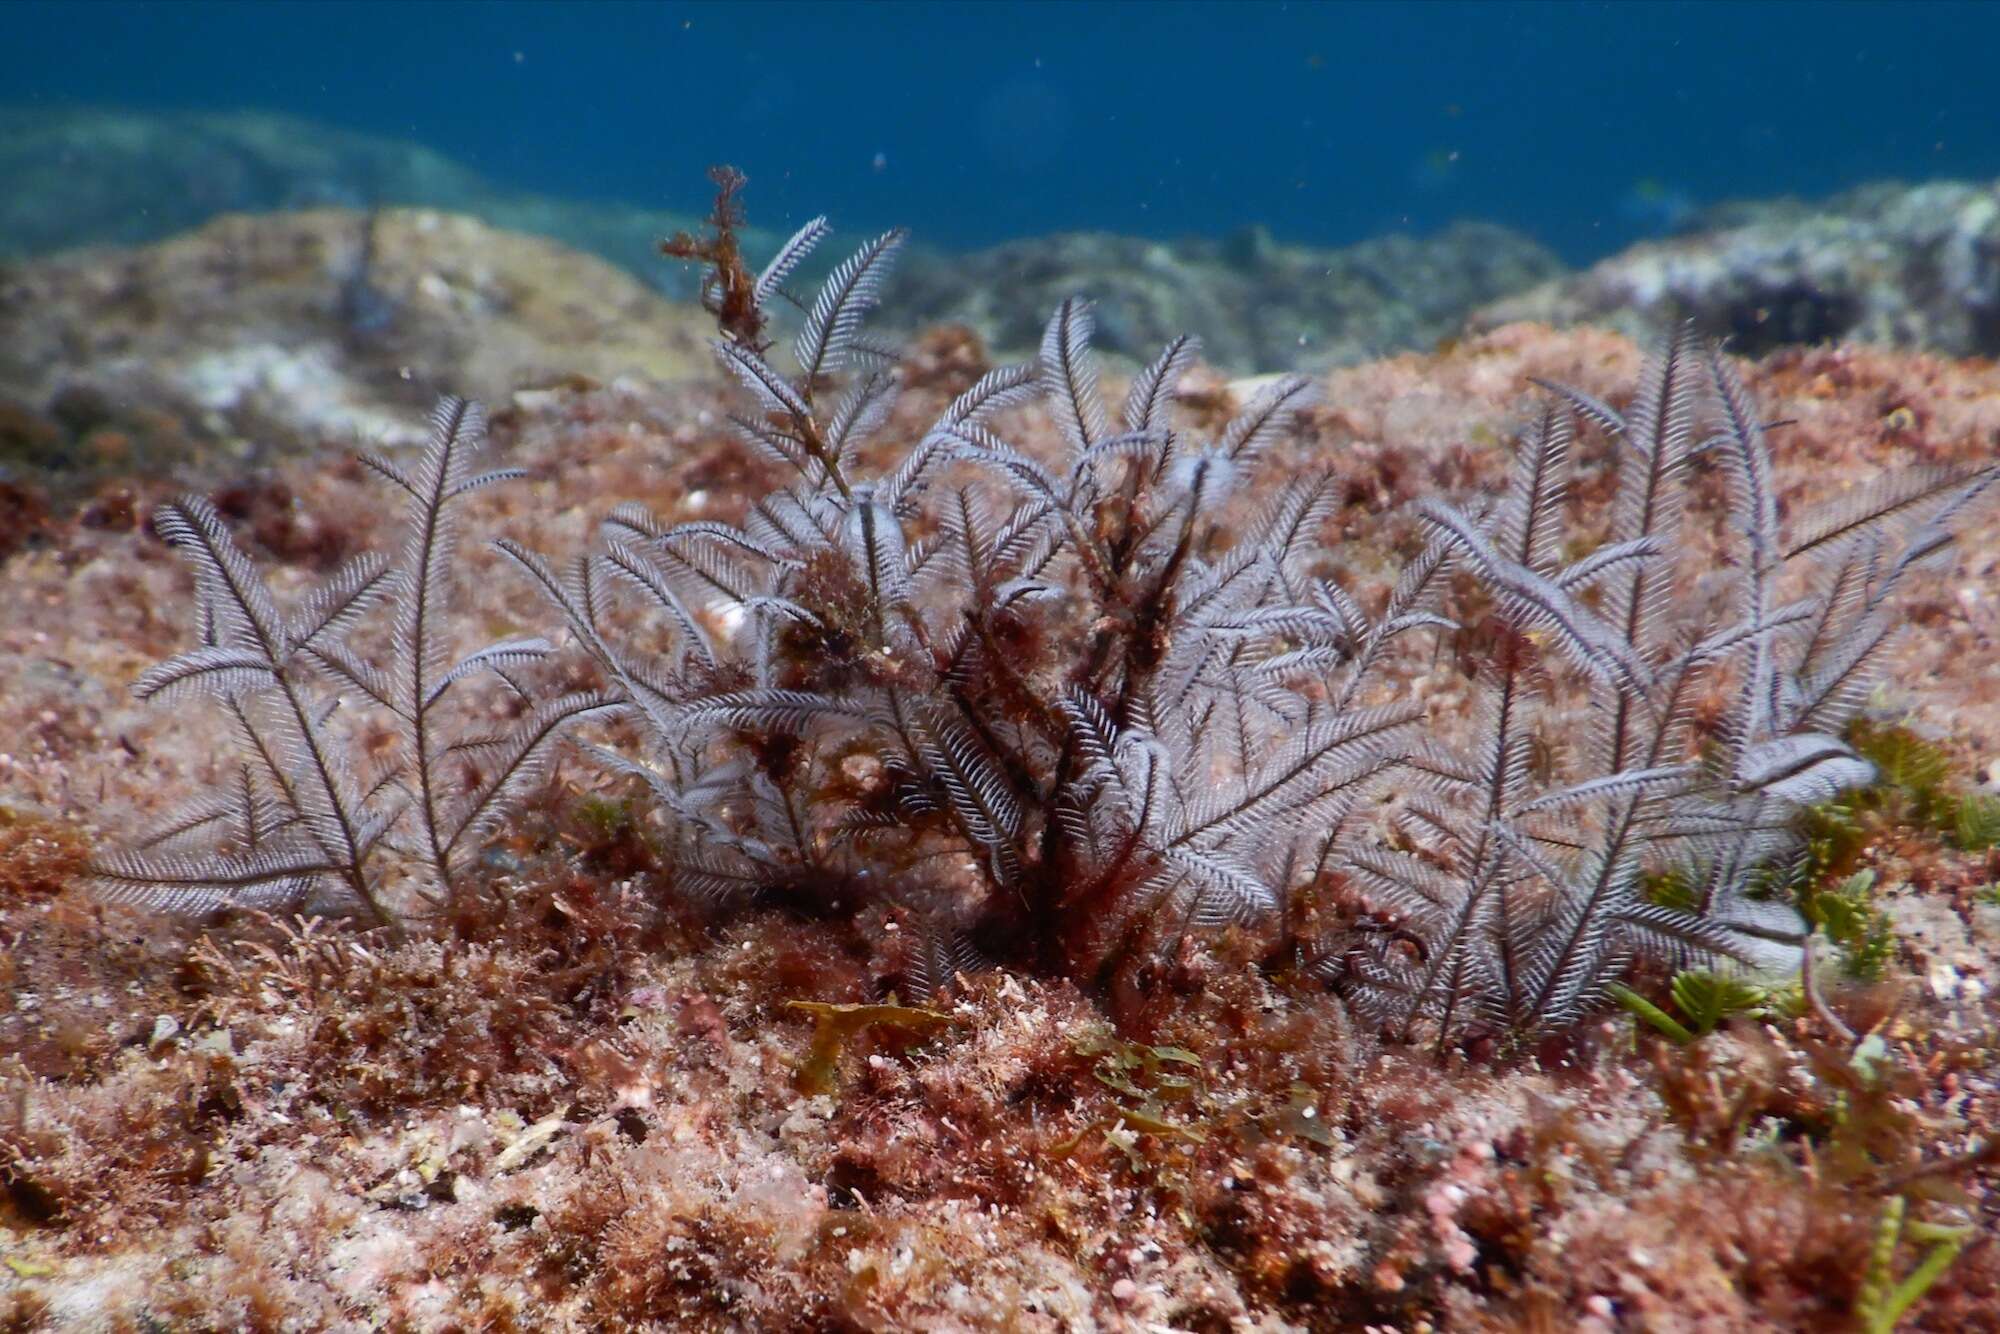 Image of Delicate white stinging hydroids